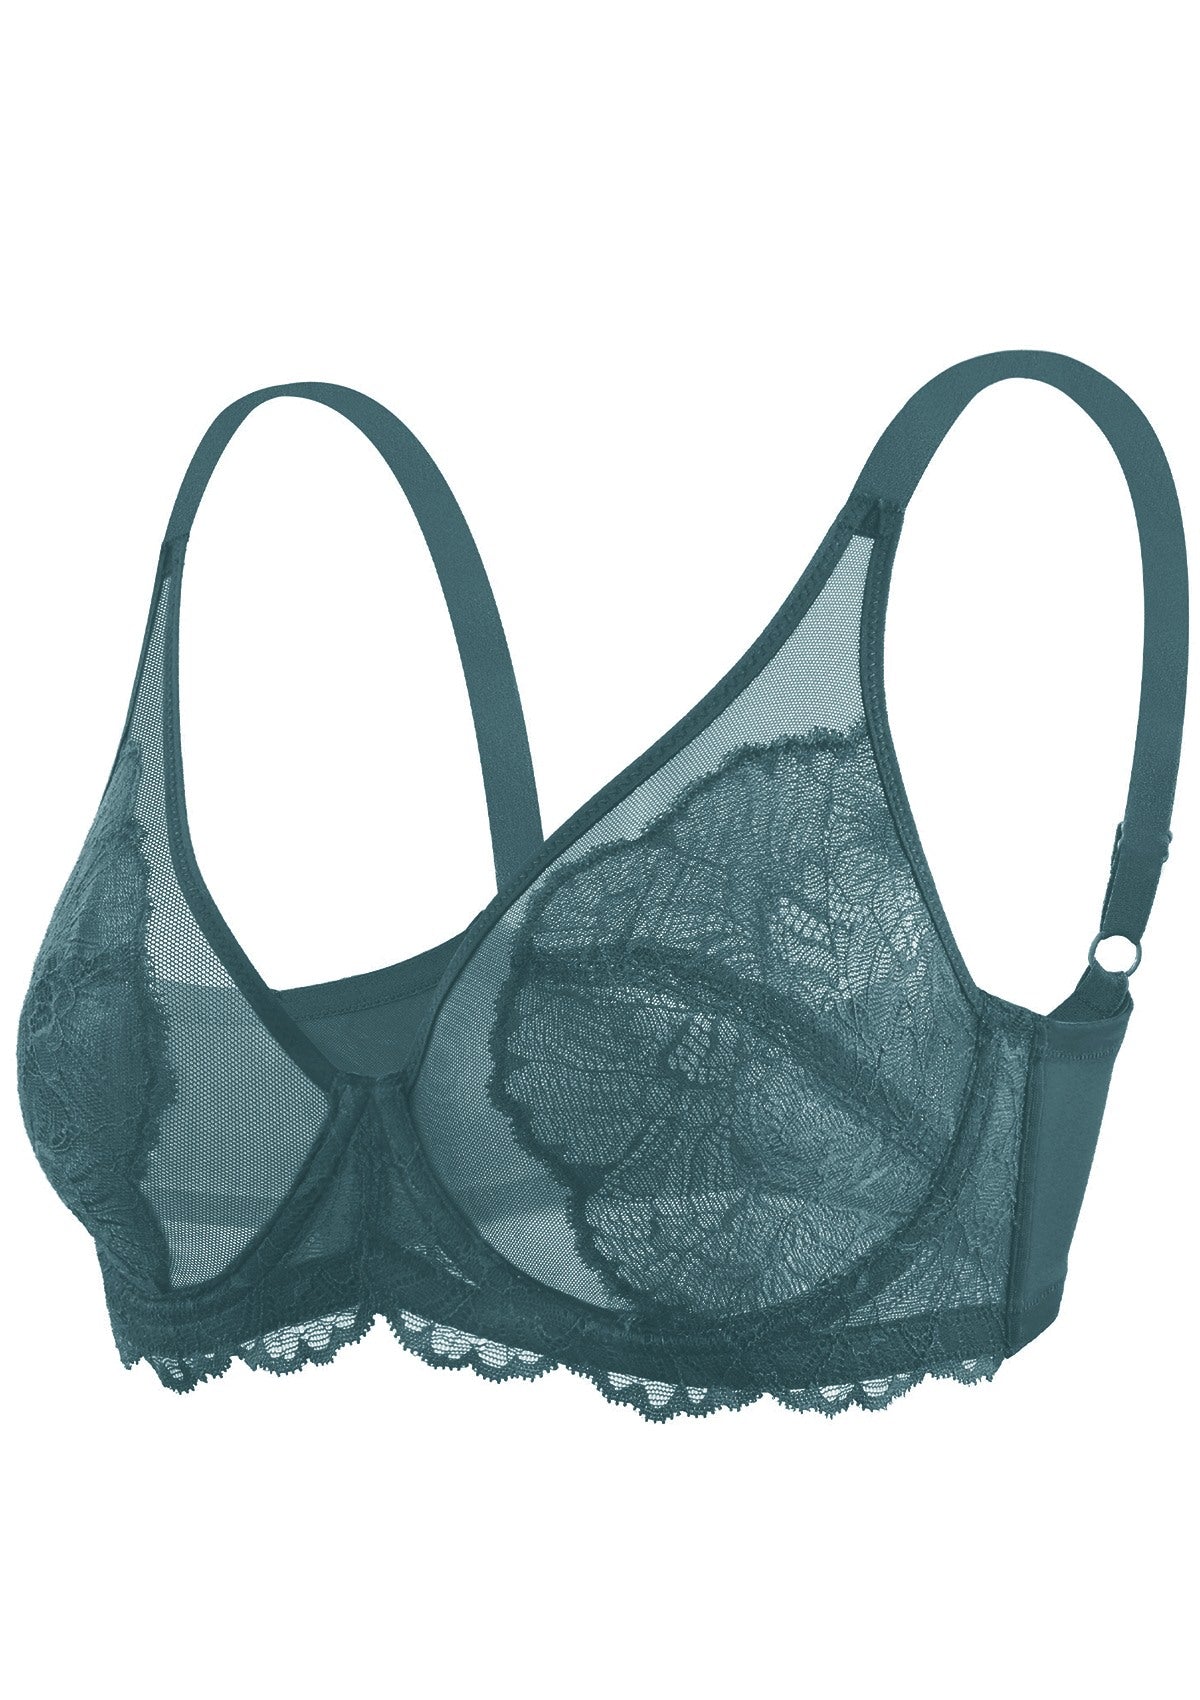 HSIA Blossom Full Figure See-Through Lace Bra For Side And Back Fat - Biscay Blue / 40 / C